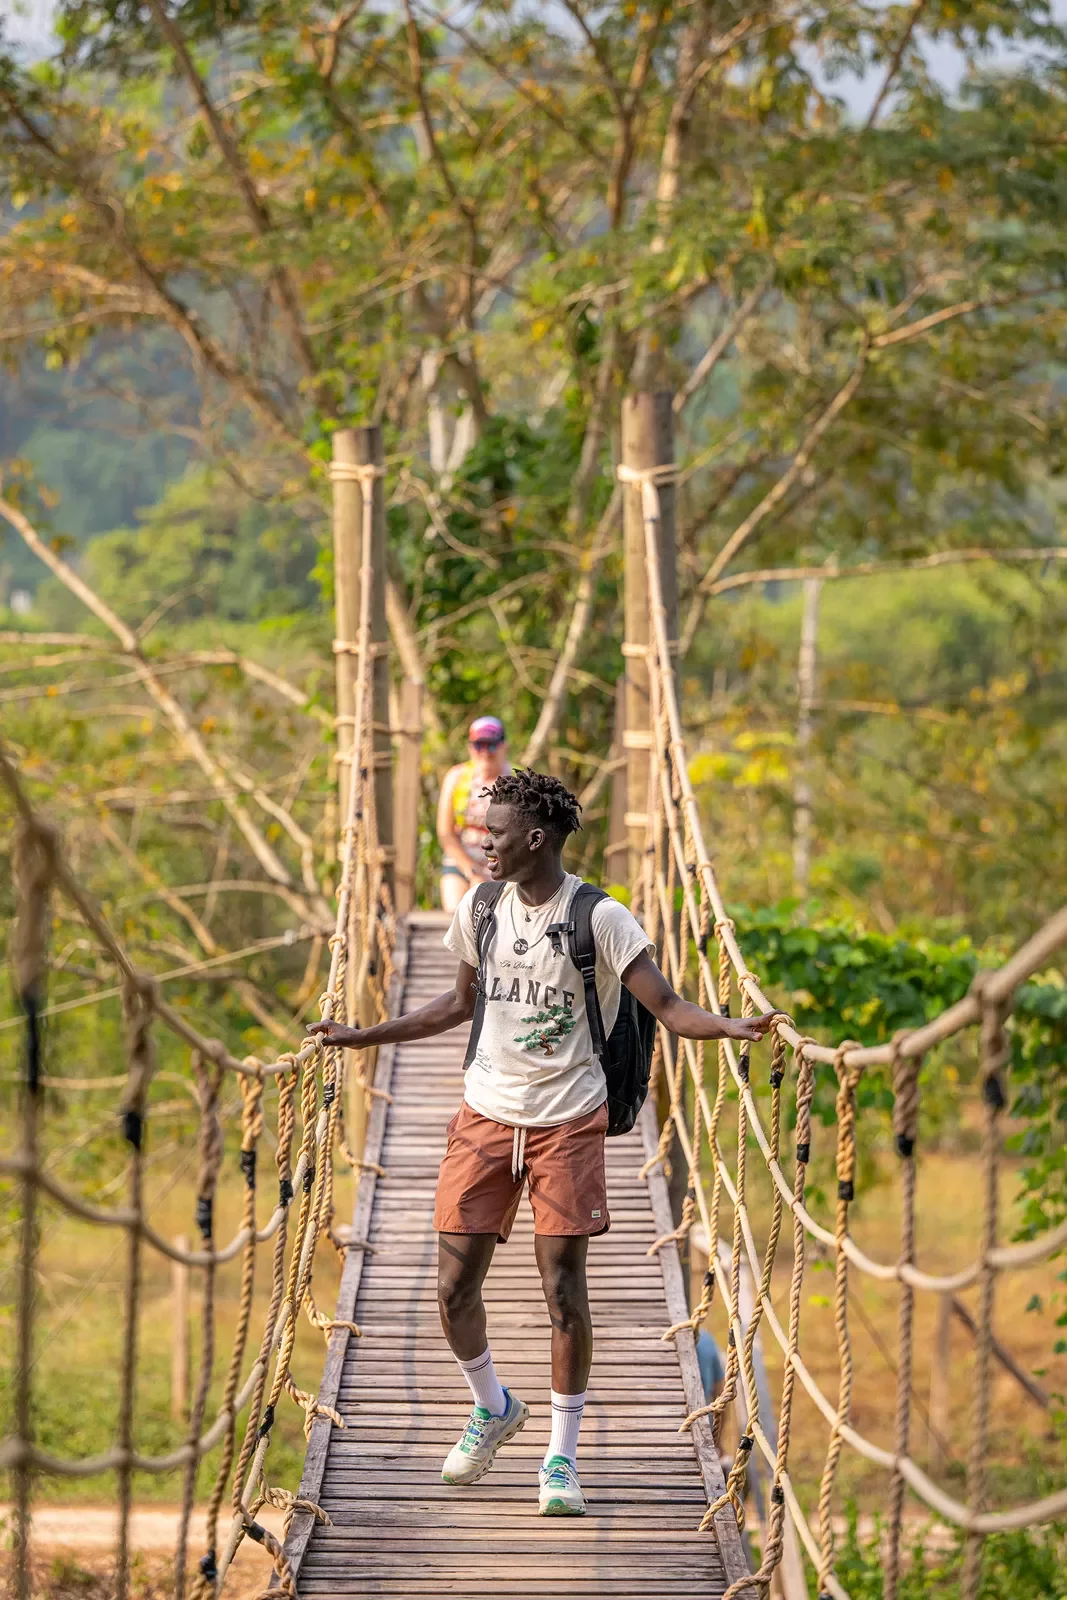 Man walking across a rope and wooden bridge